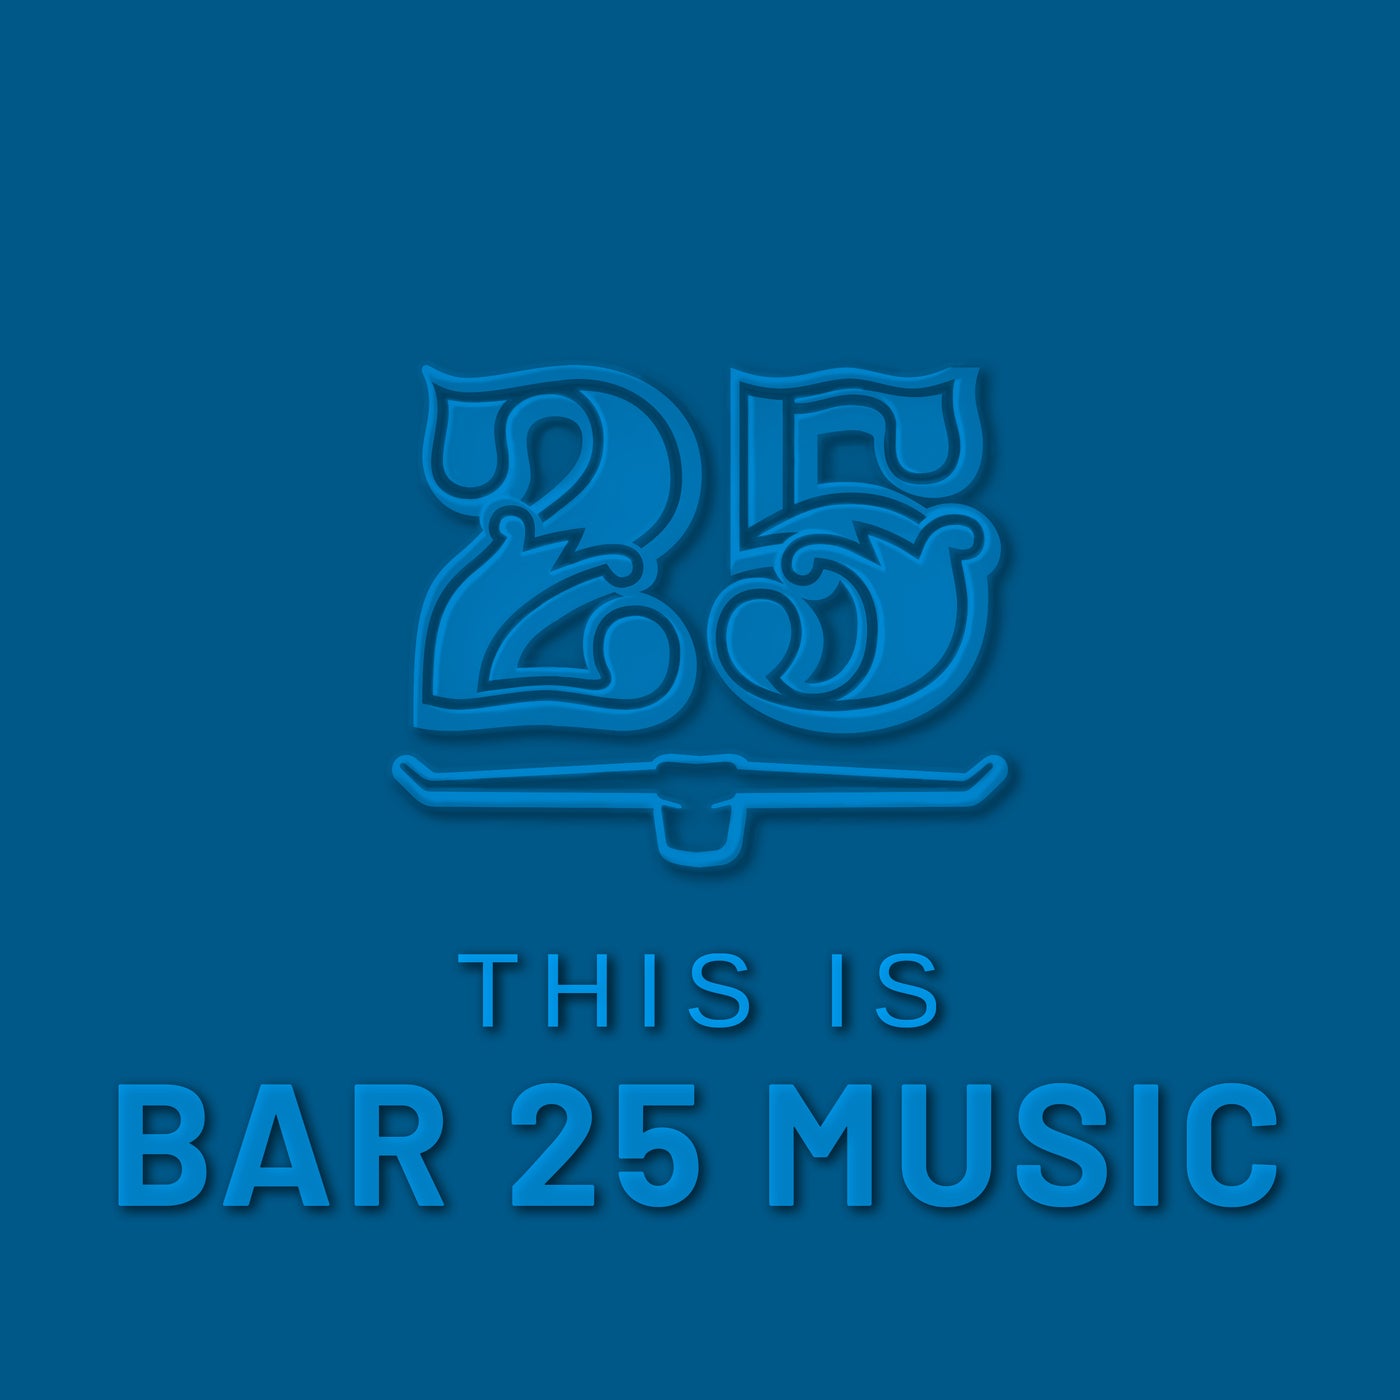 This is Bar 25 Music